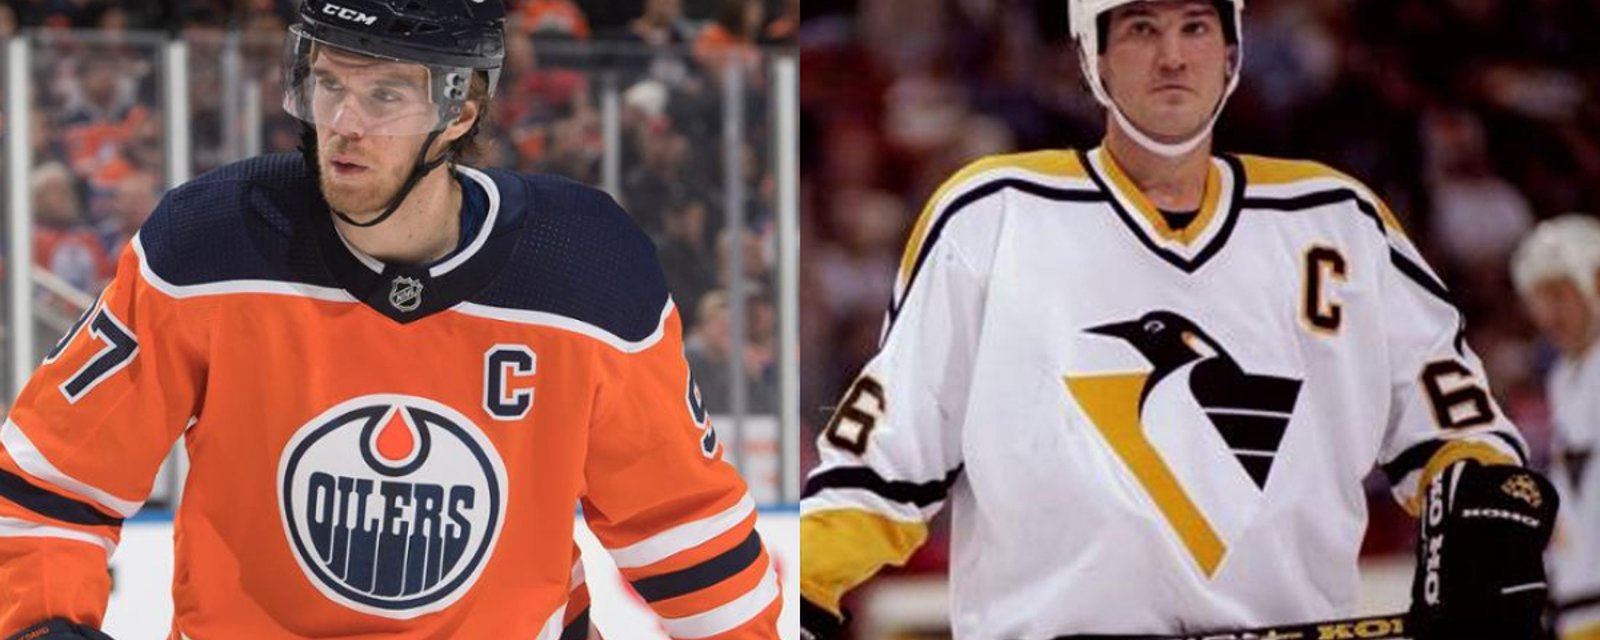 Connor McDavid breaks NHL record previously set by Mario Lemieux.